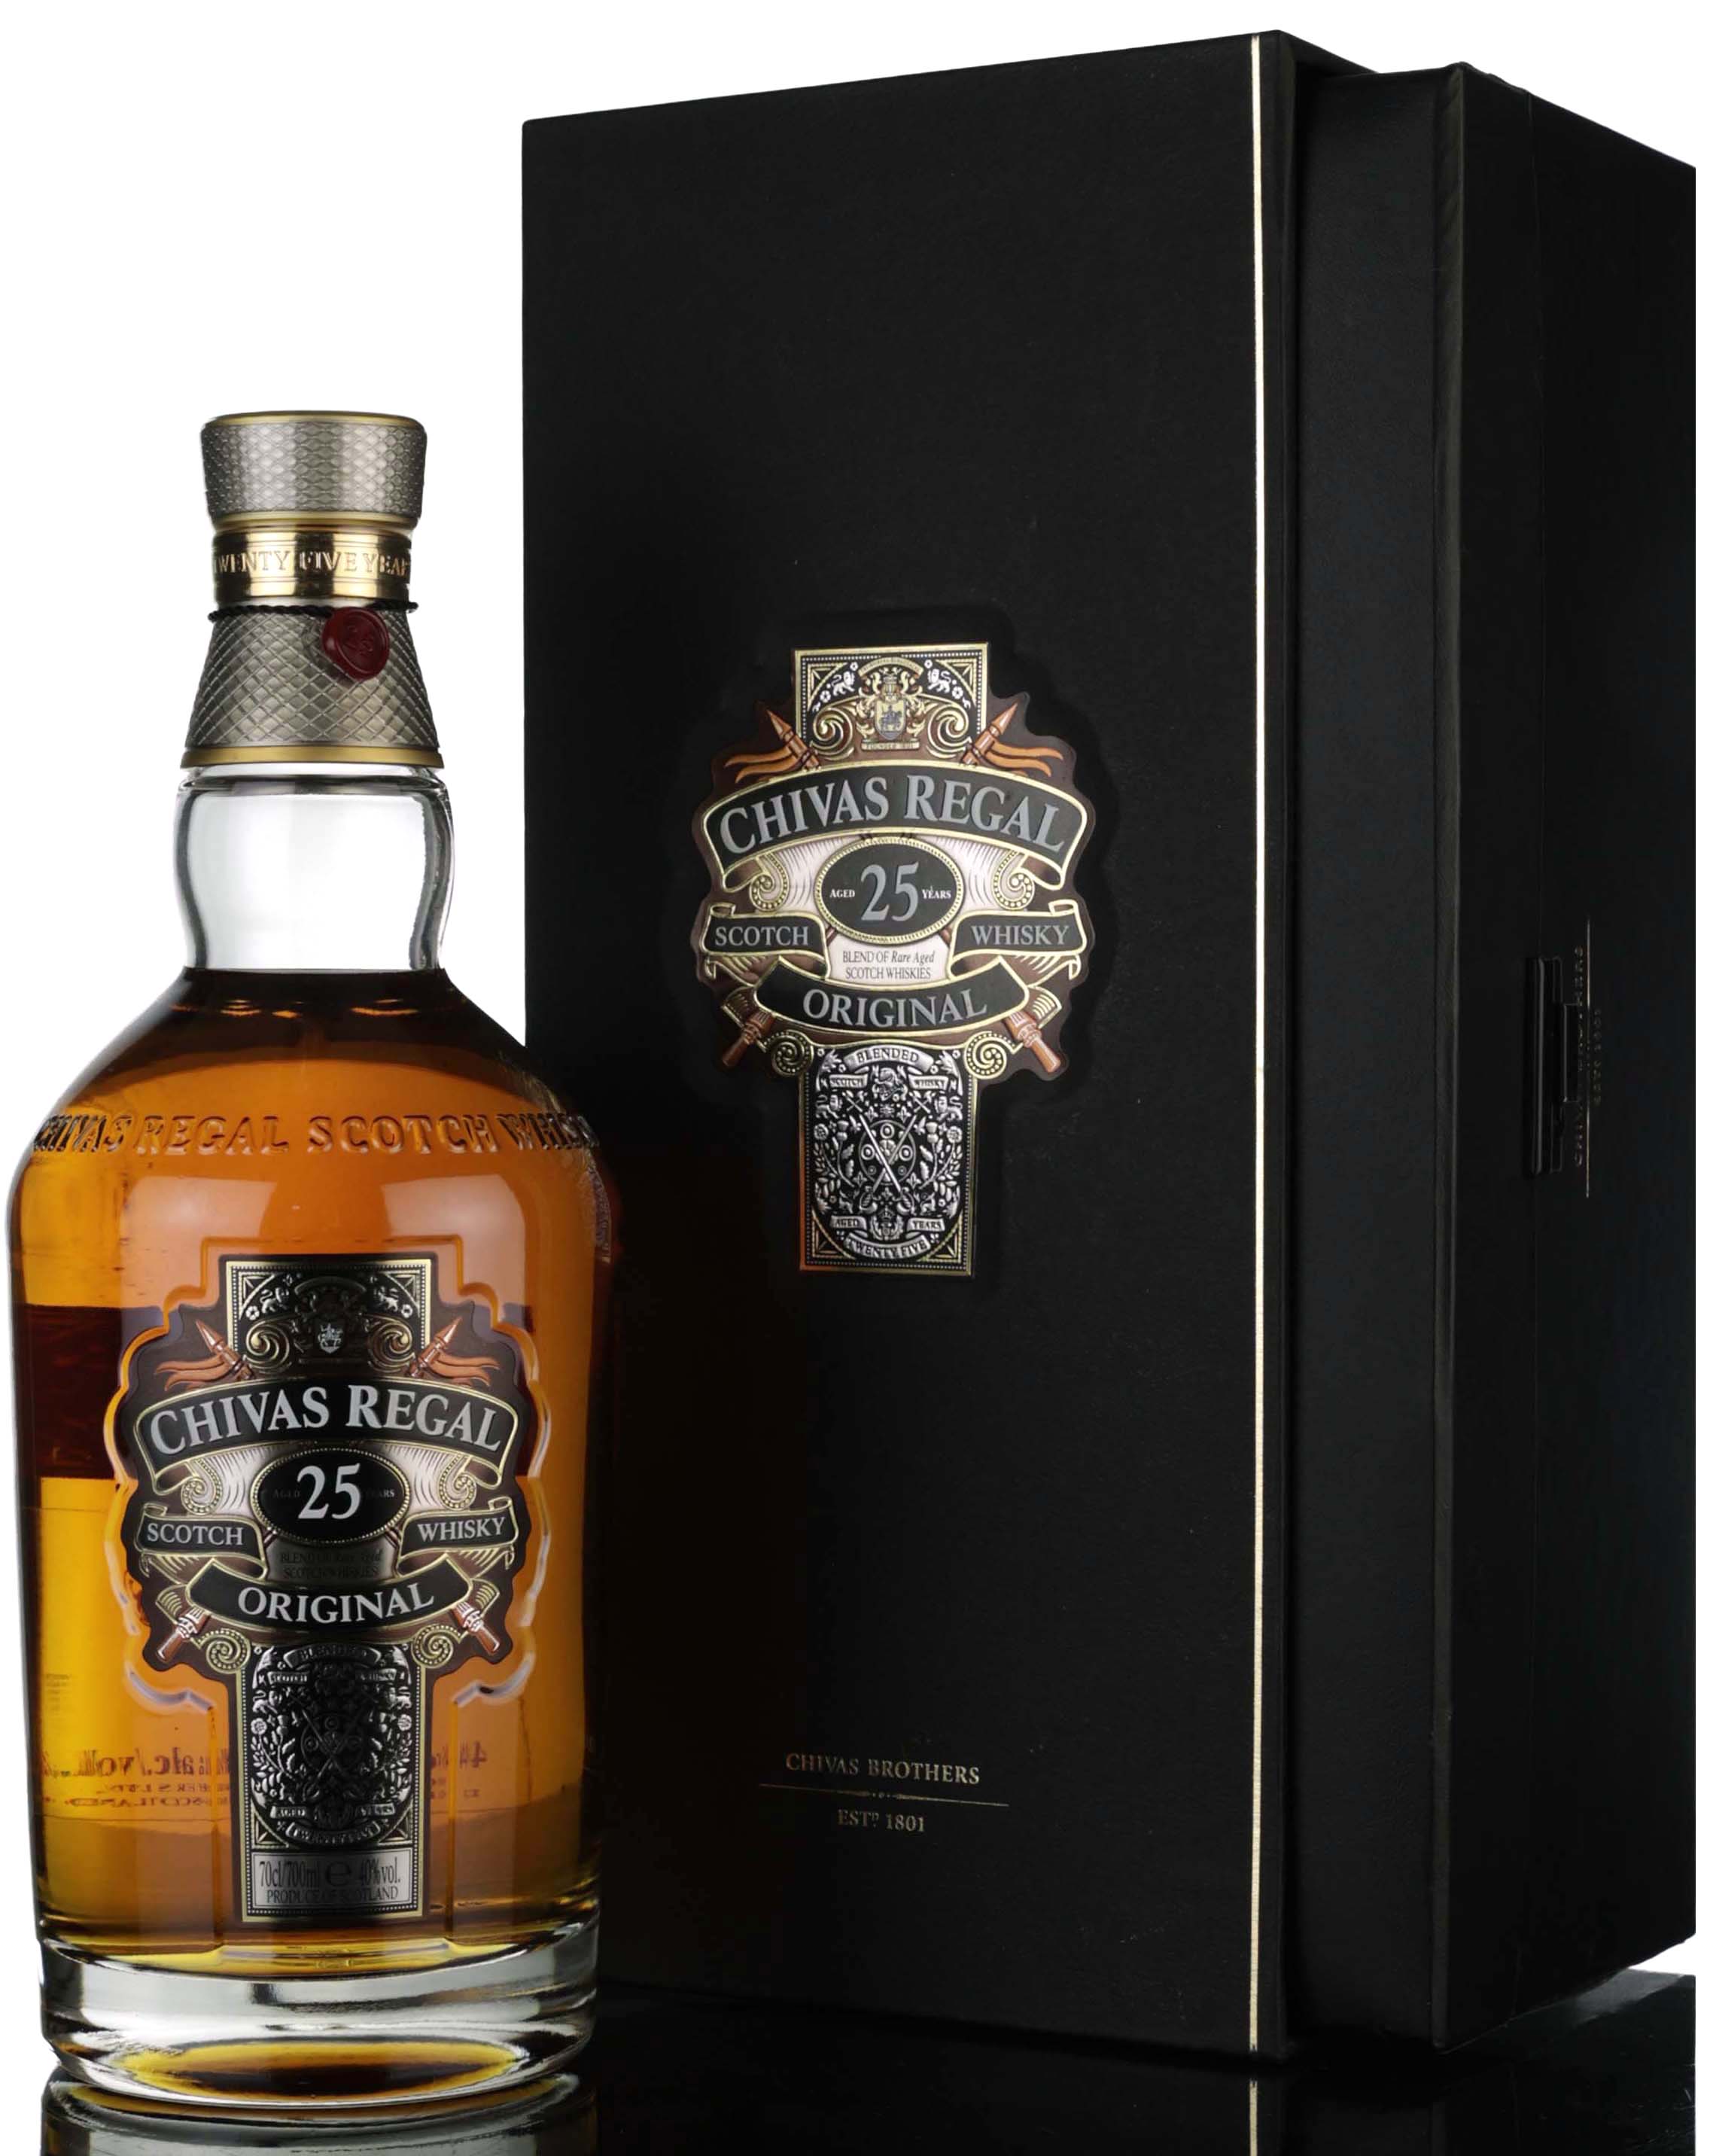 Chivas Regal 25 Year Old - Limited Edition - 2007 Release